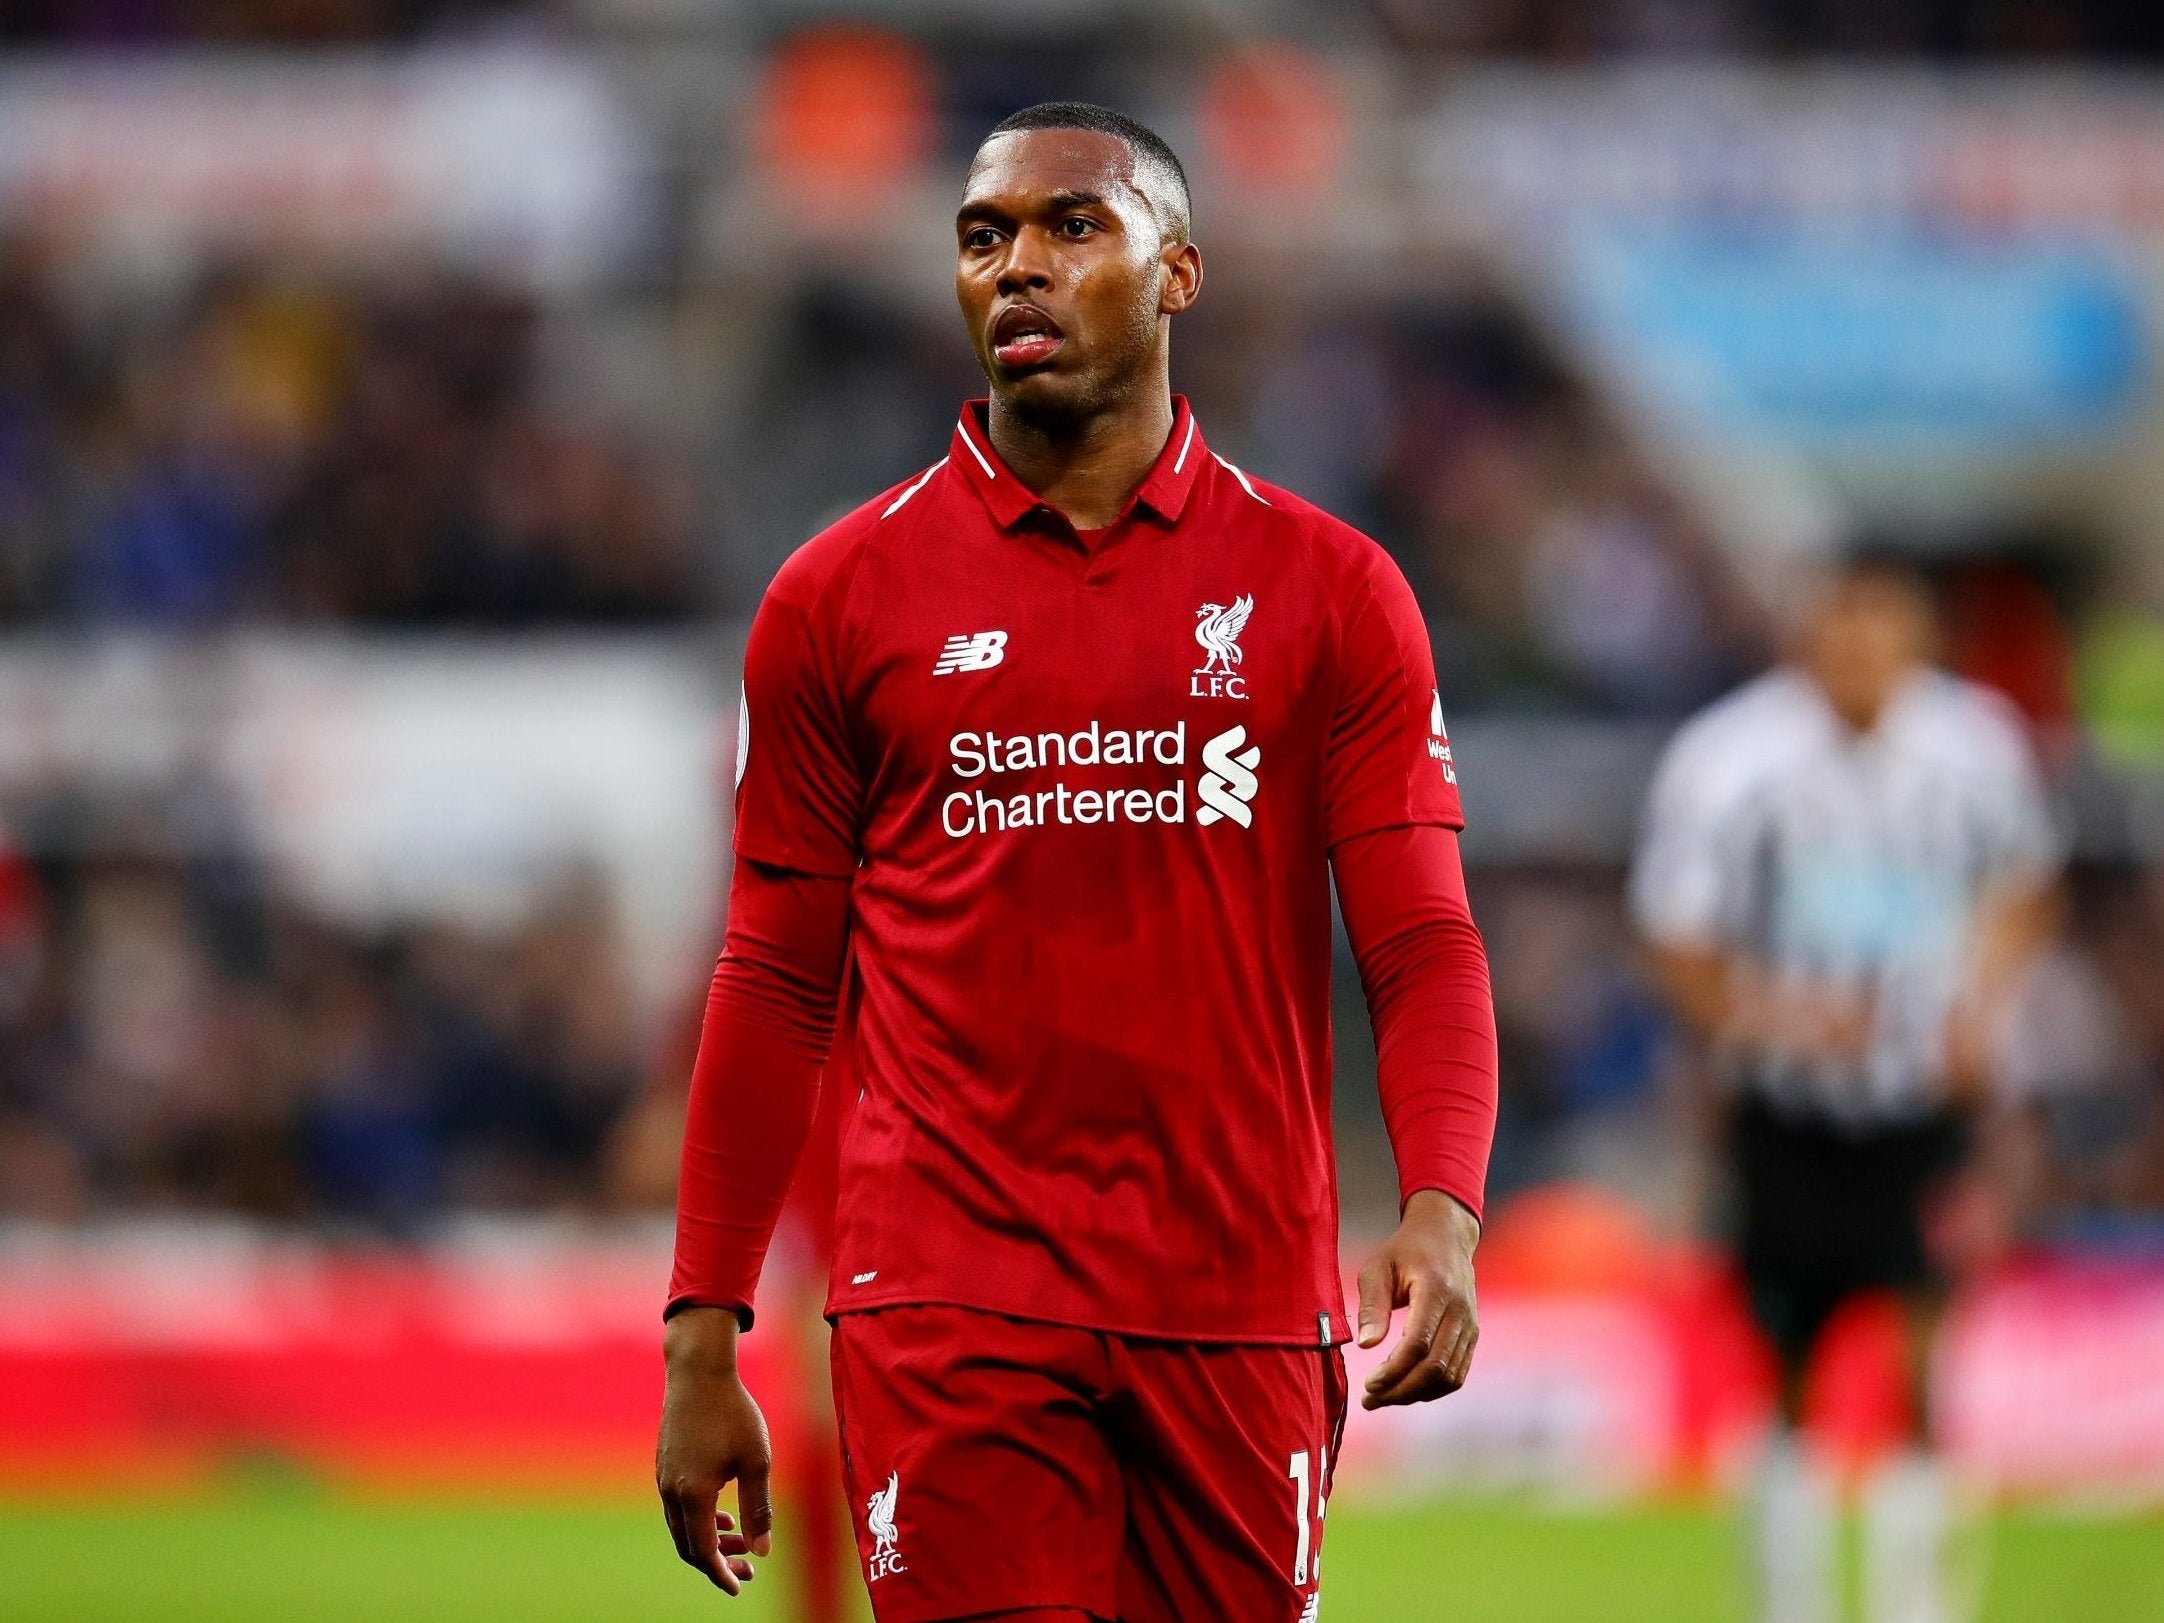 Daniel Sturridge most recently played for Liverpool